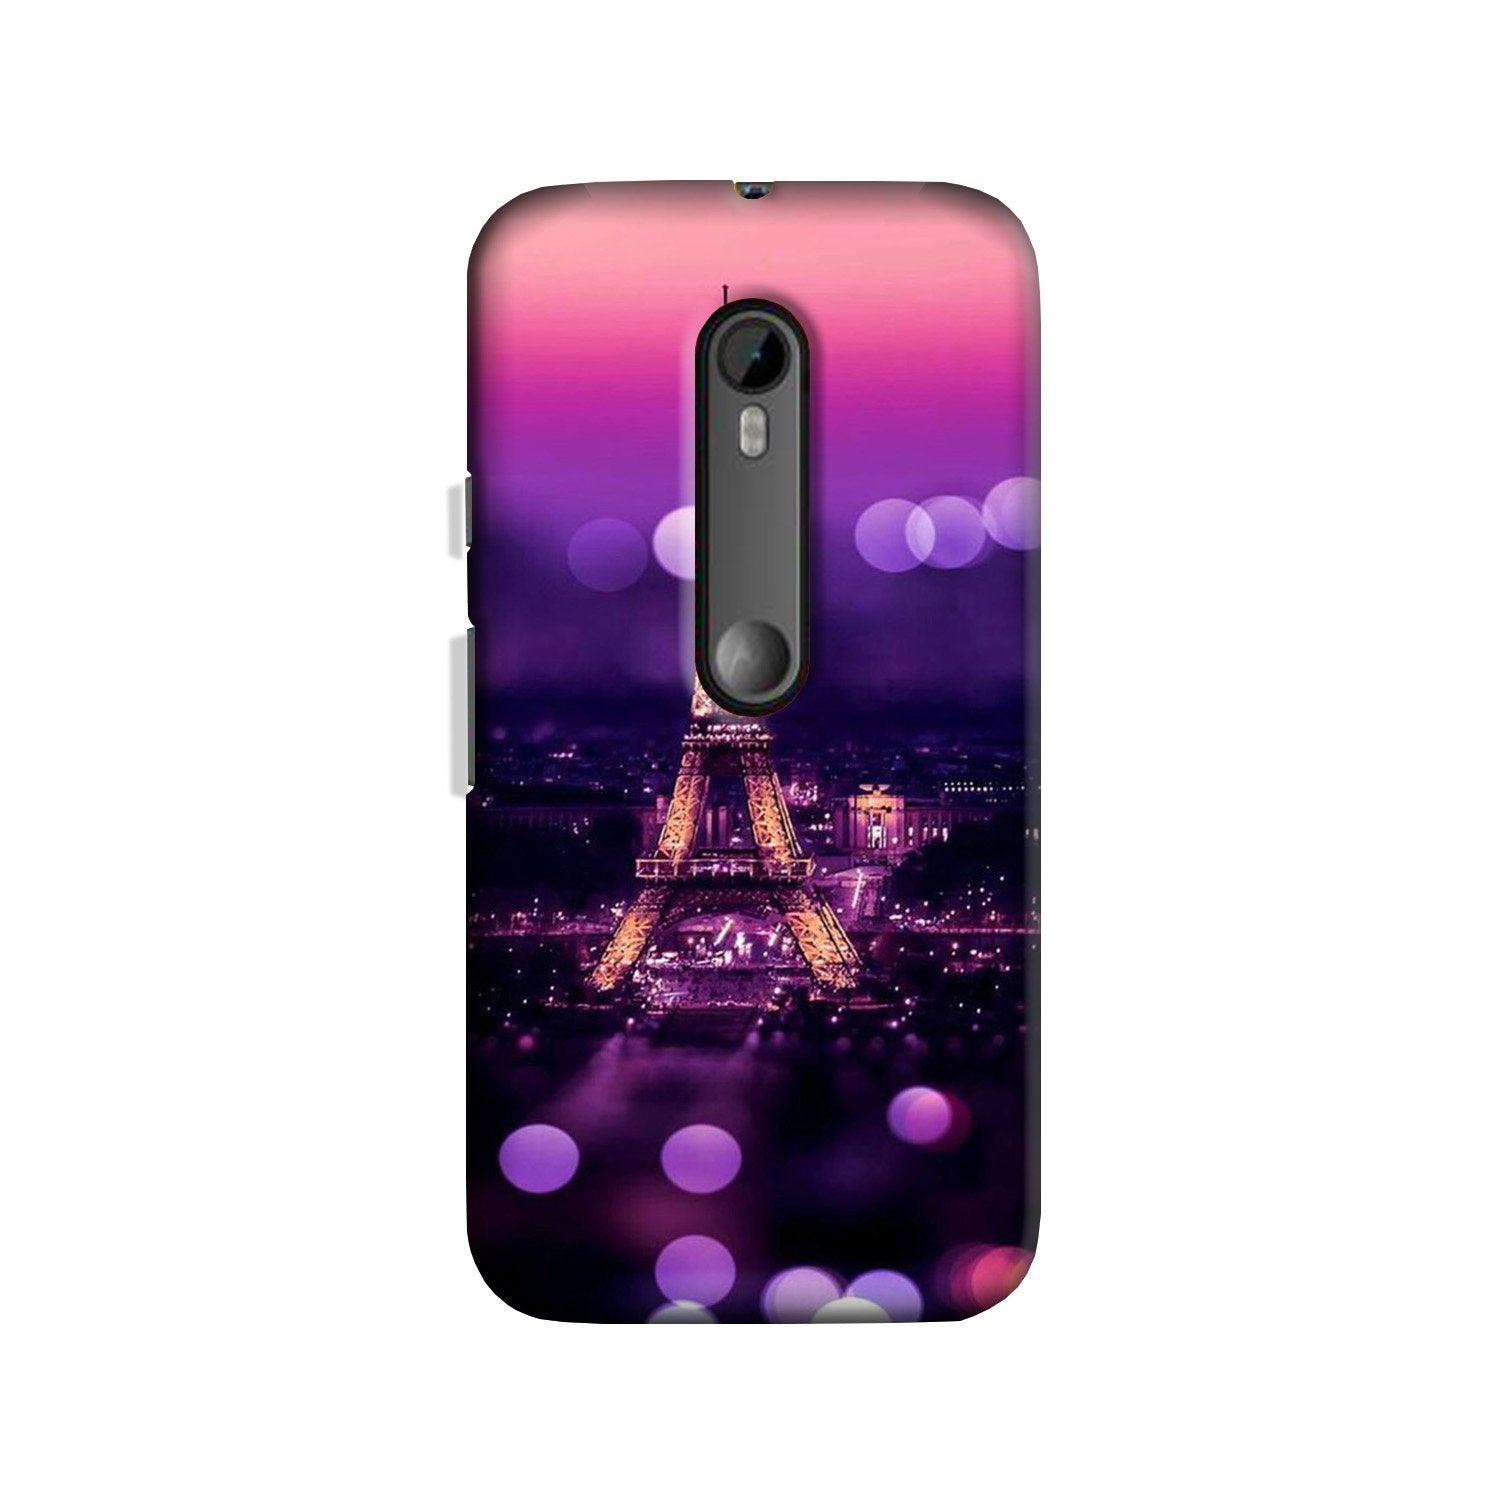 Eiffel Tower Case for Moto X Play